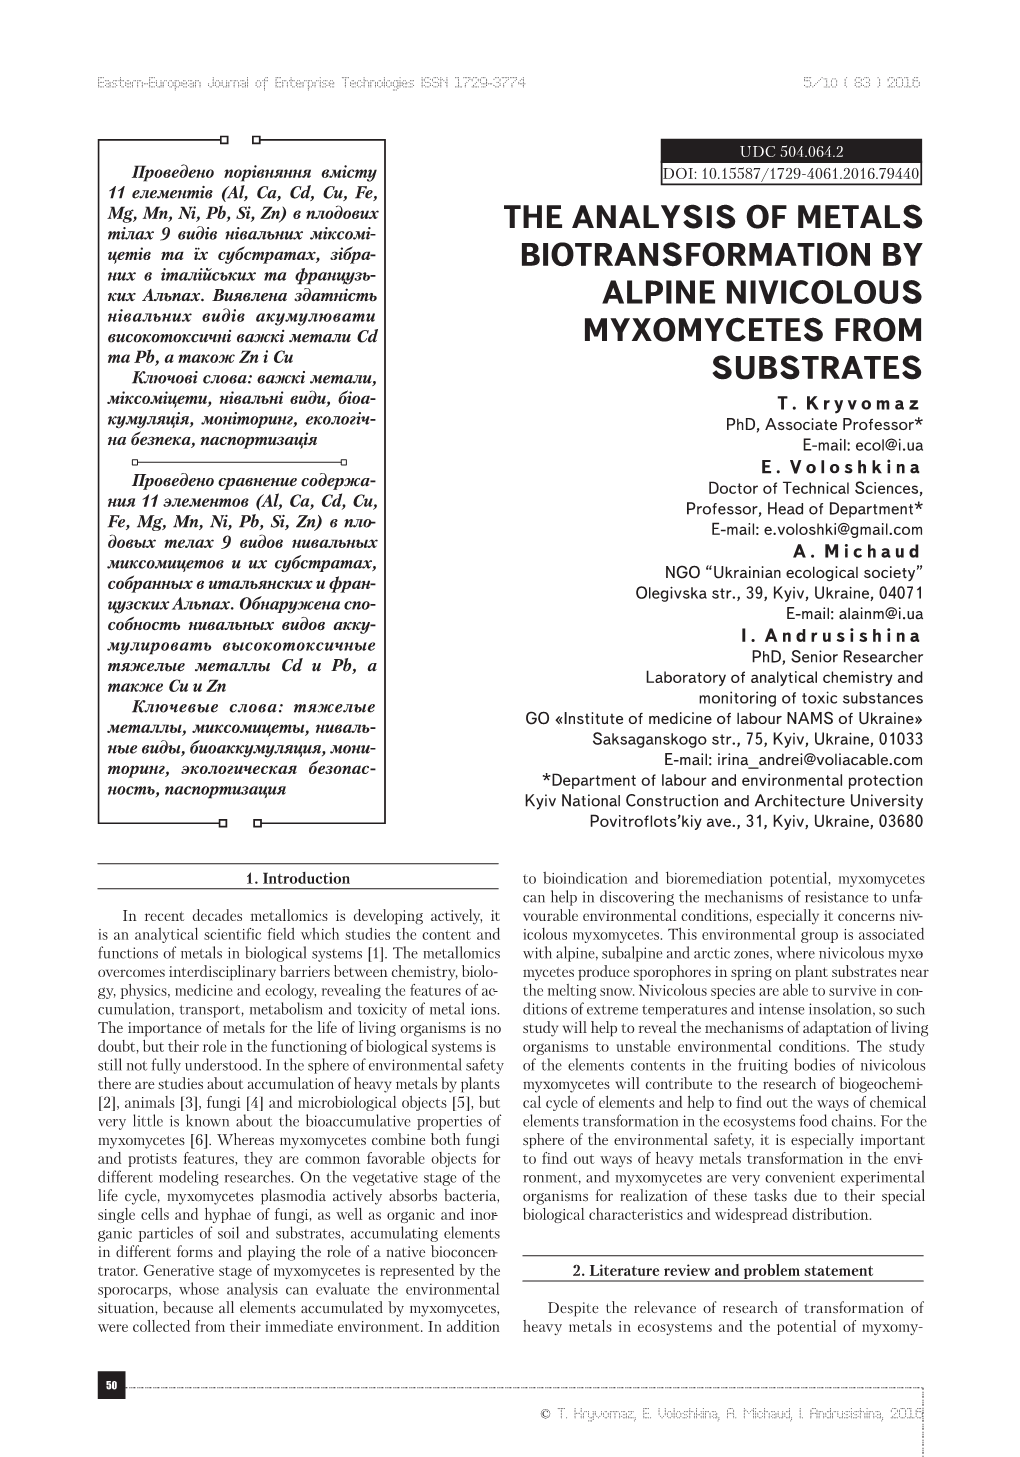 The Analysis of Metals Biotransformation by Alpine Nivicolous Myxomycetes from Substrates